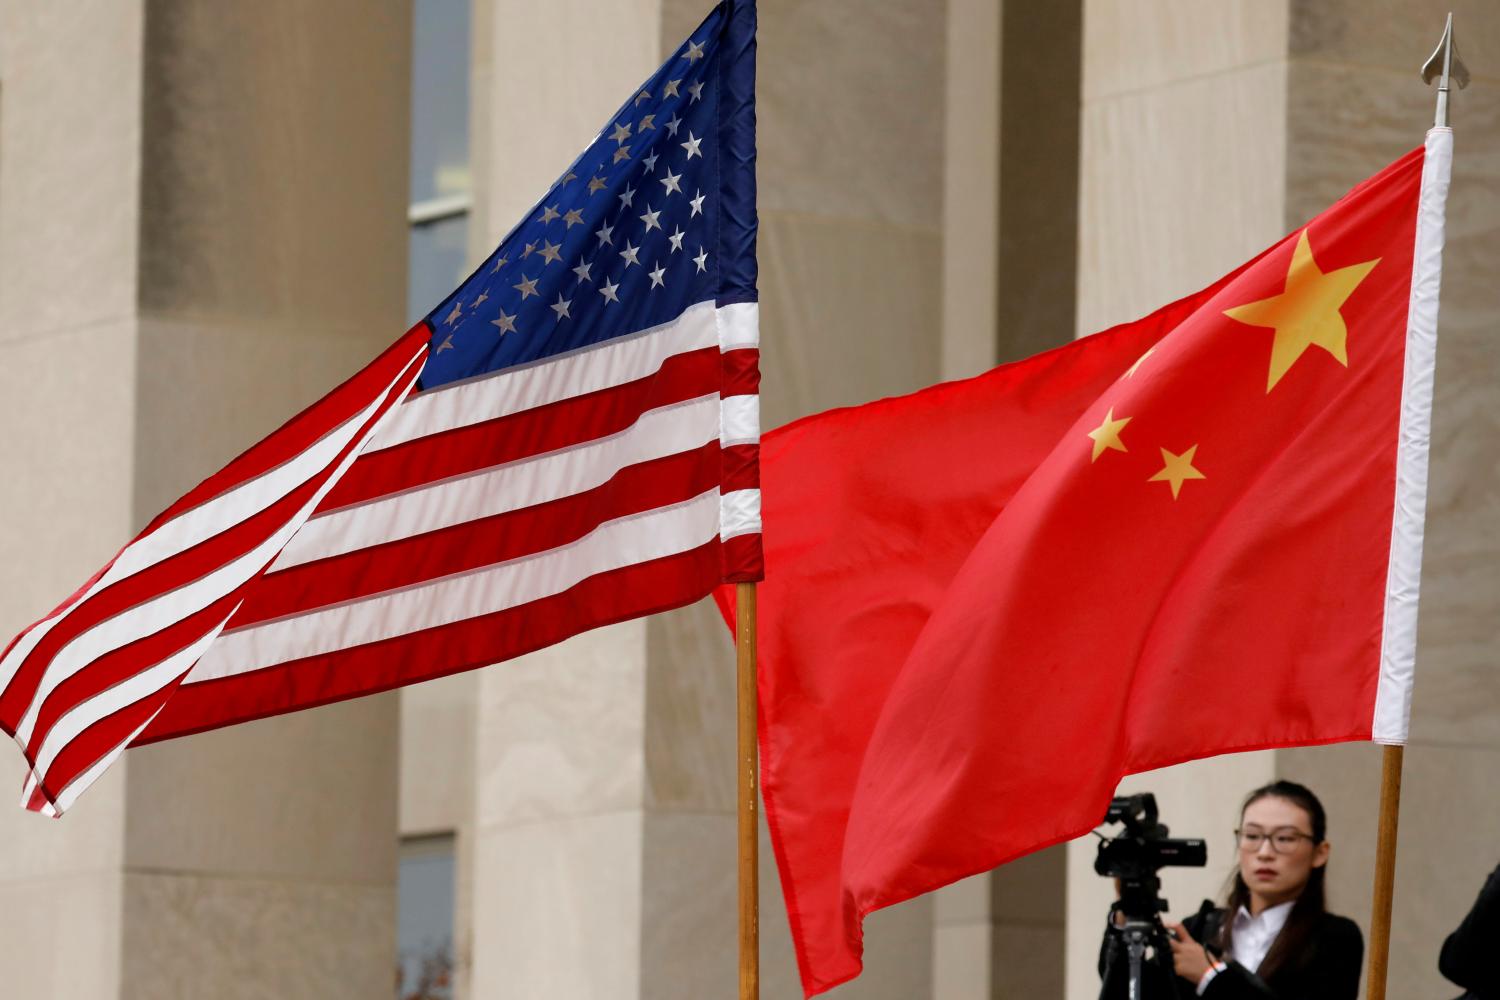 FILE PHOTO: U.S. and Chinese flags are seen before a meeting between senior defence officials from both countries at the Pentagon in Arlington, Virginia, U.S., November 9, 2018. REUTERS/Yuri Gripas/File Photo